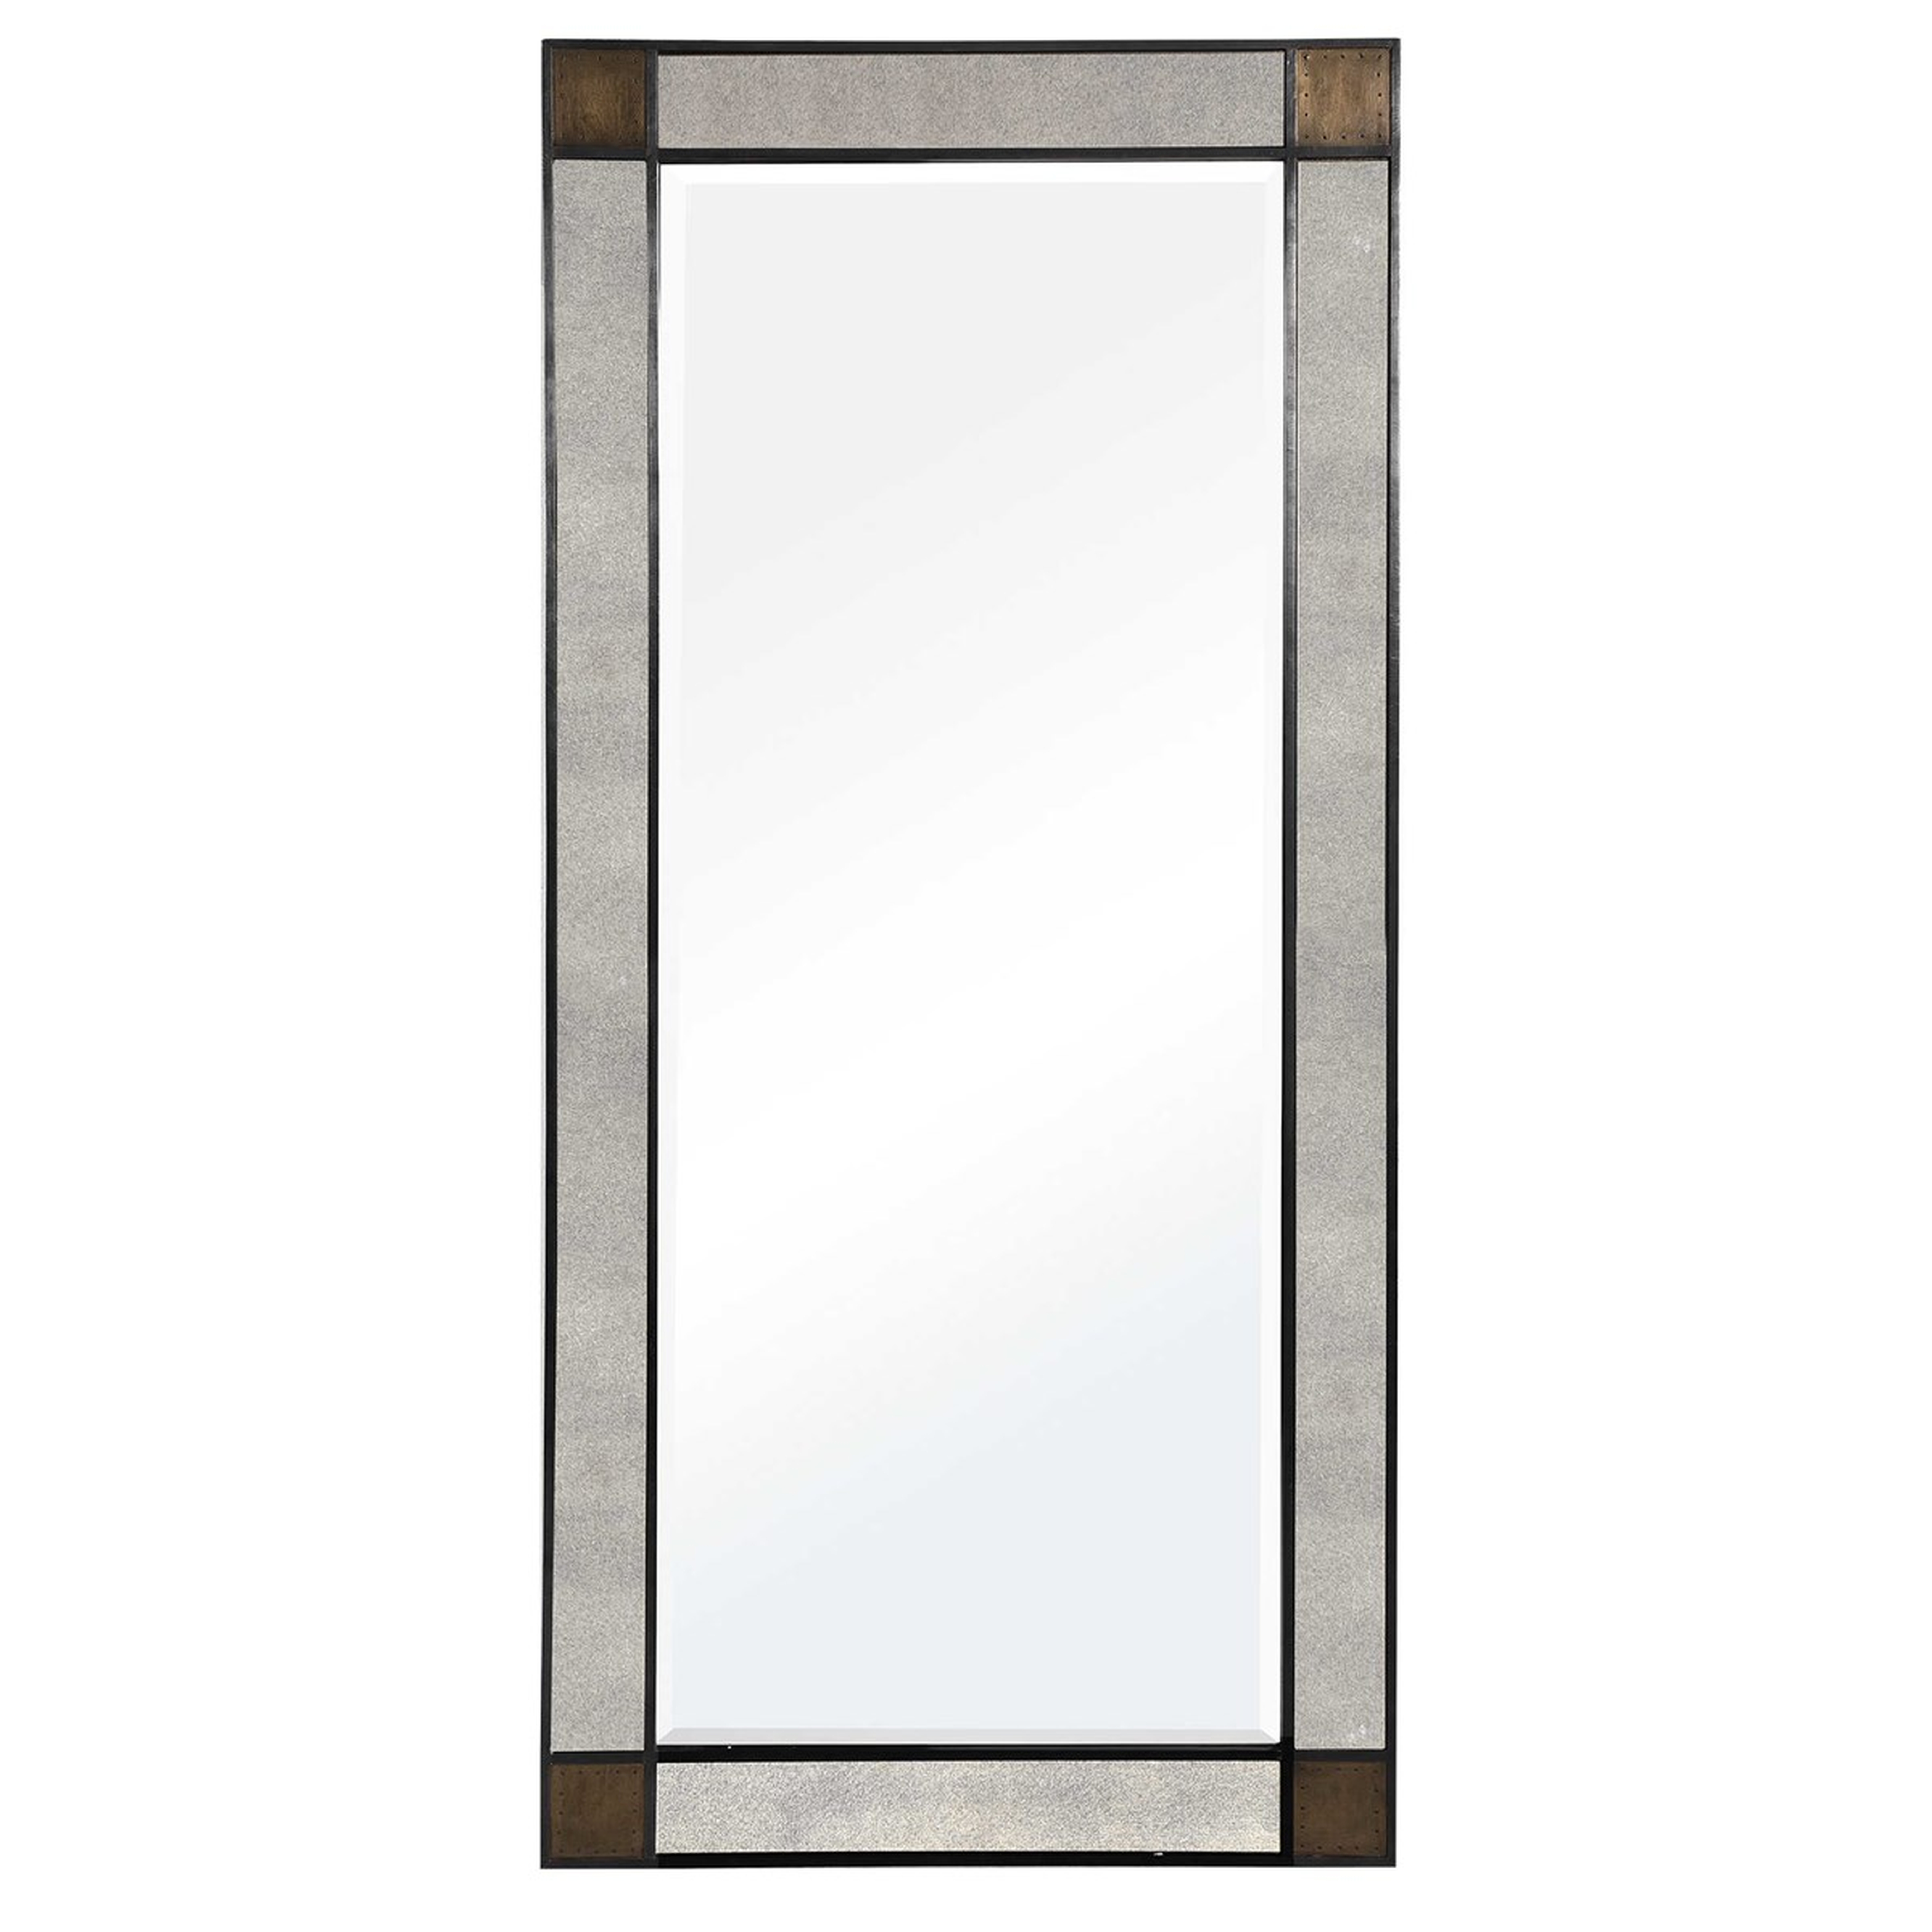 Newcomb Leaner Mirror - Hudsonhill Foundry